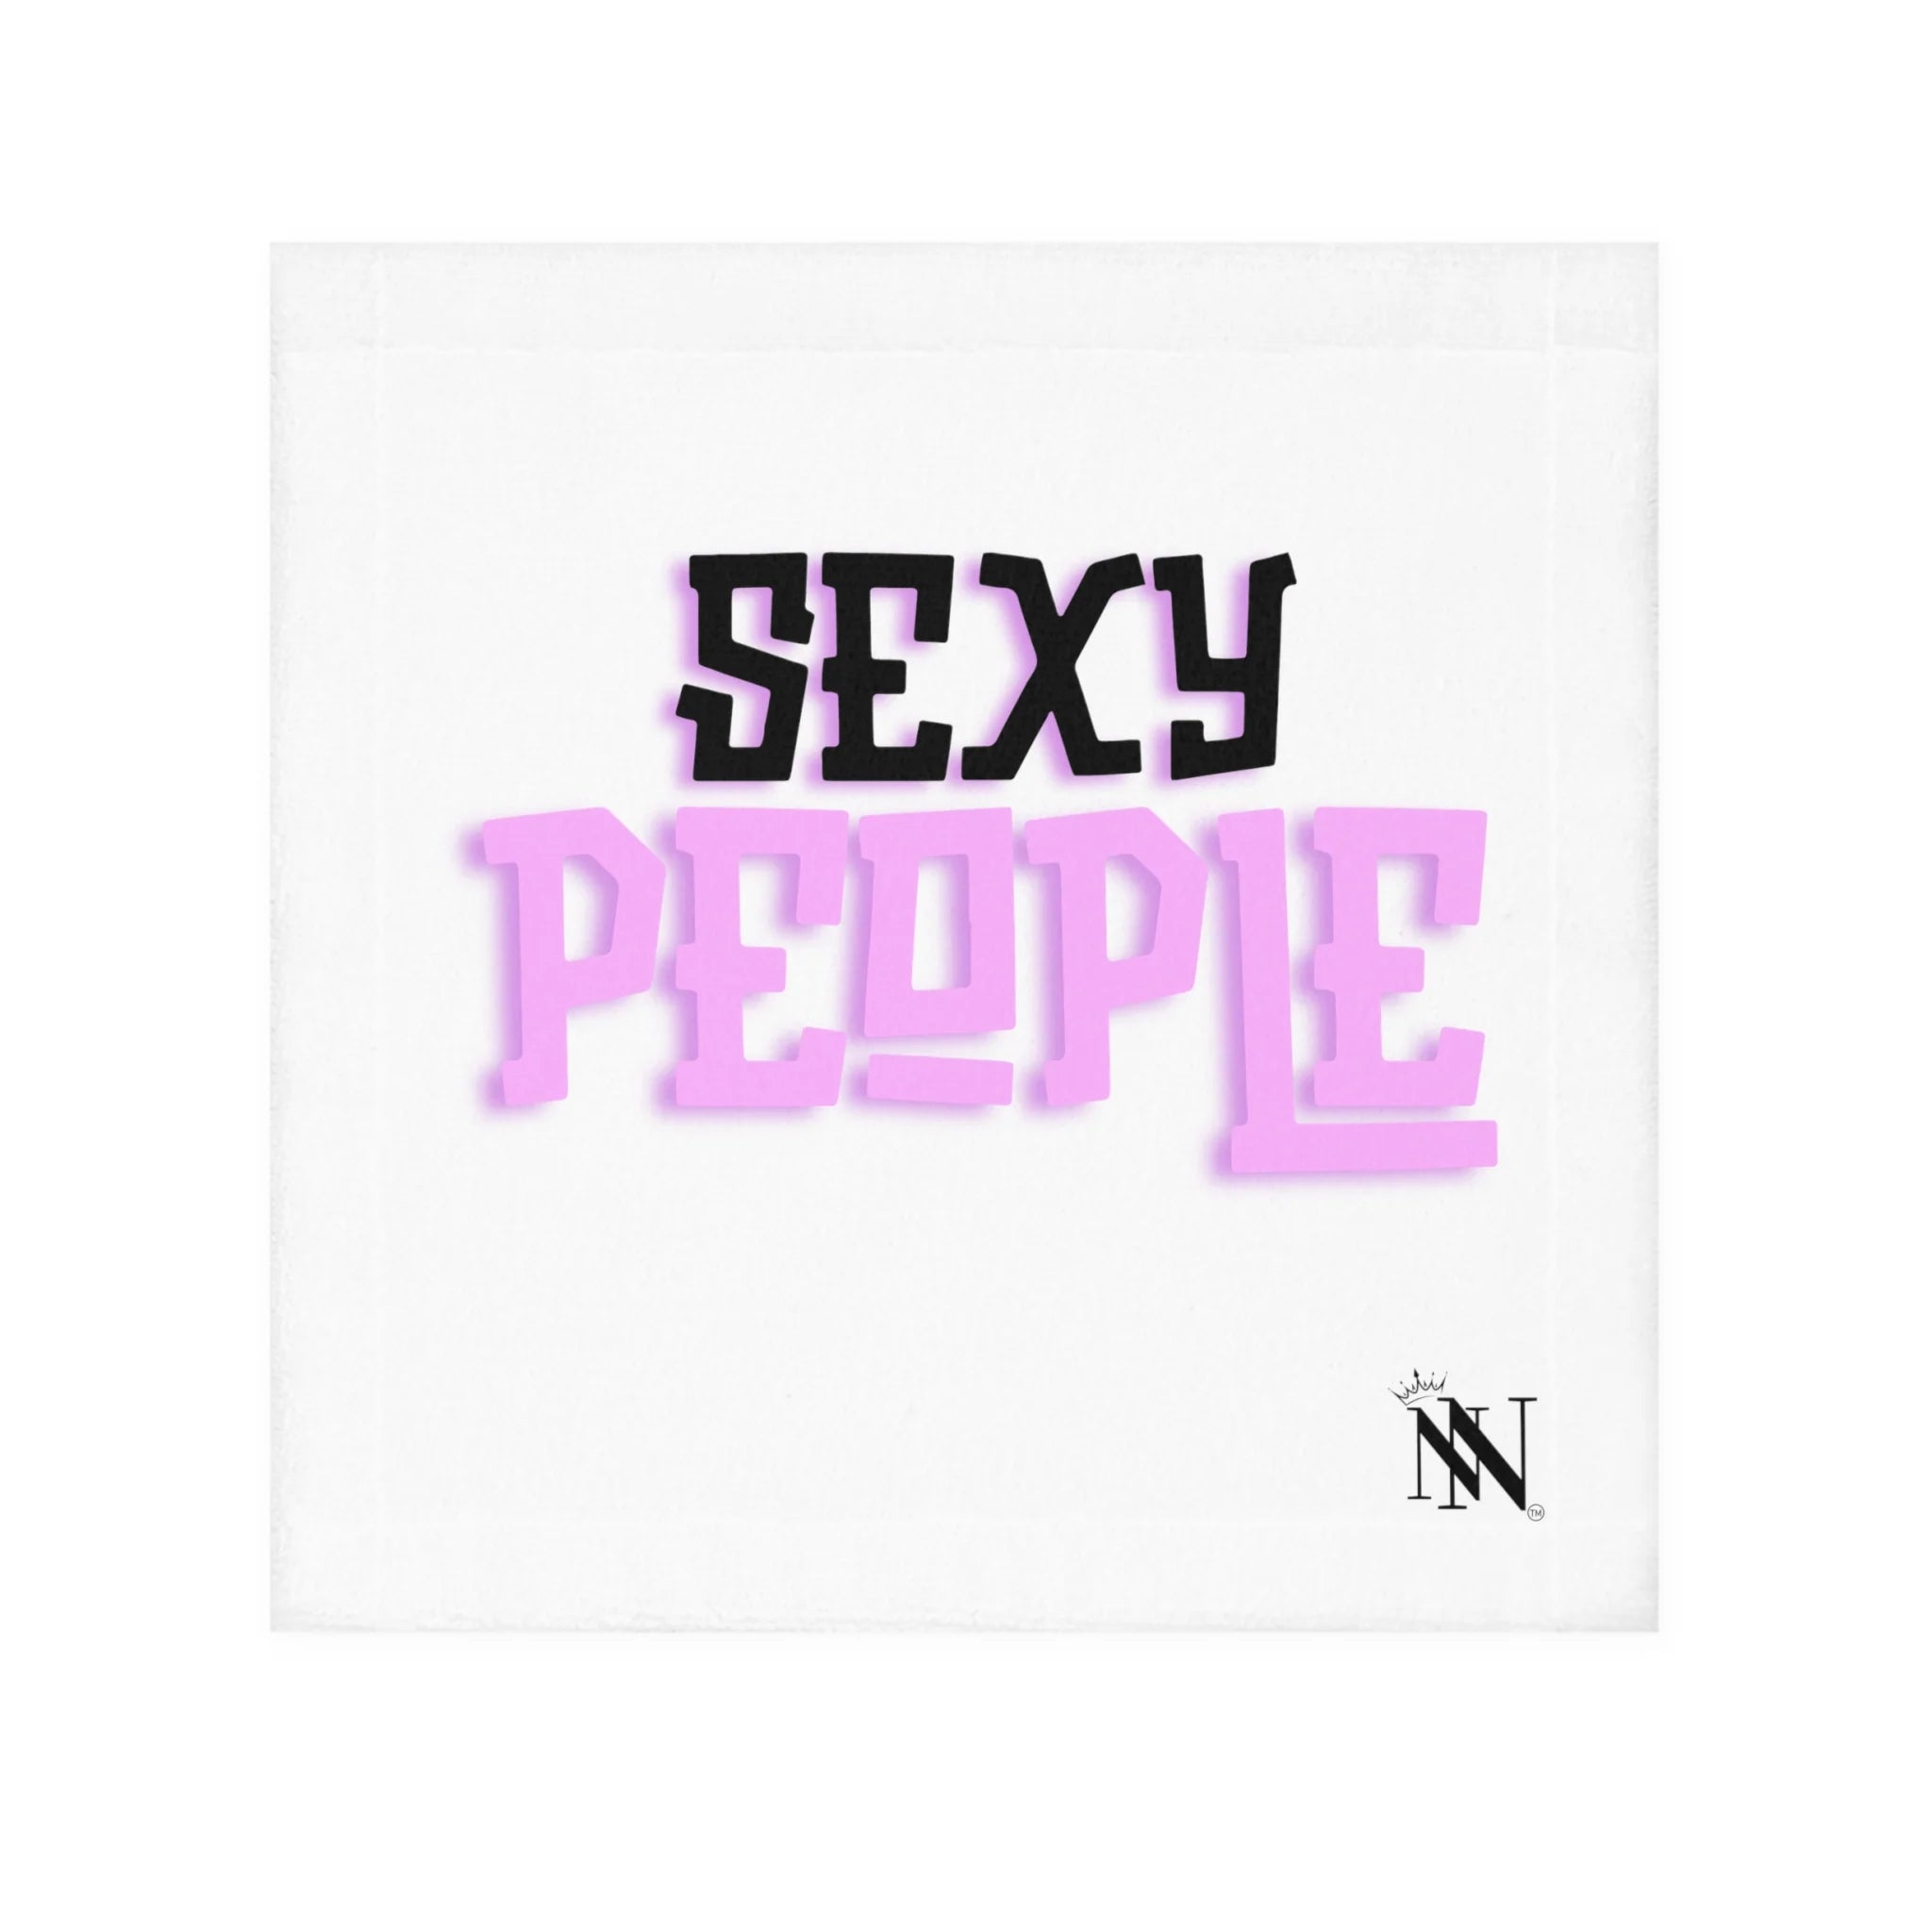 Sexy people sex towel